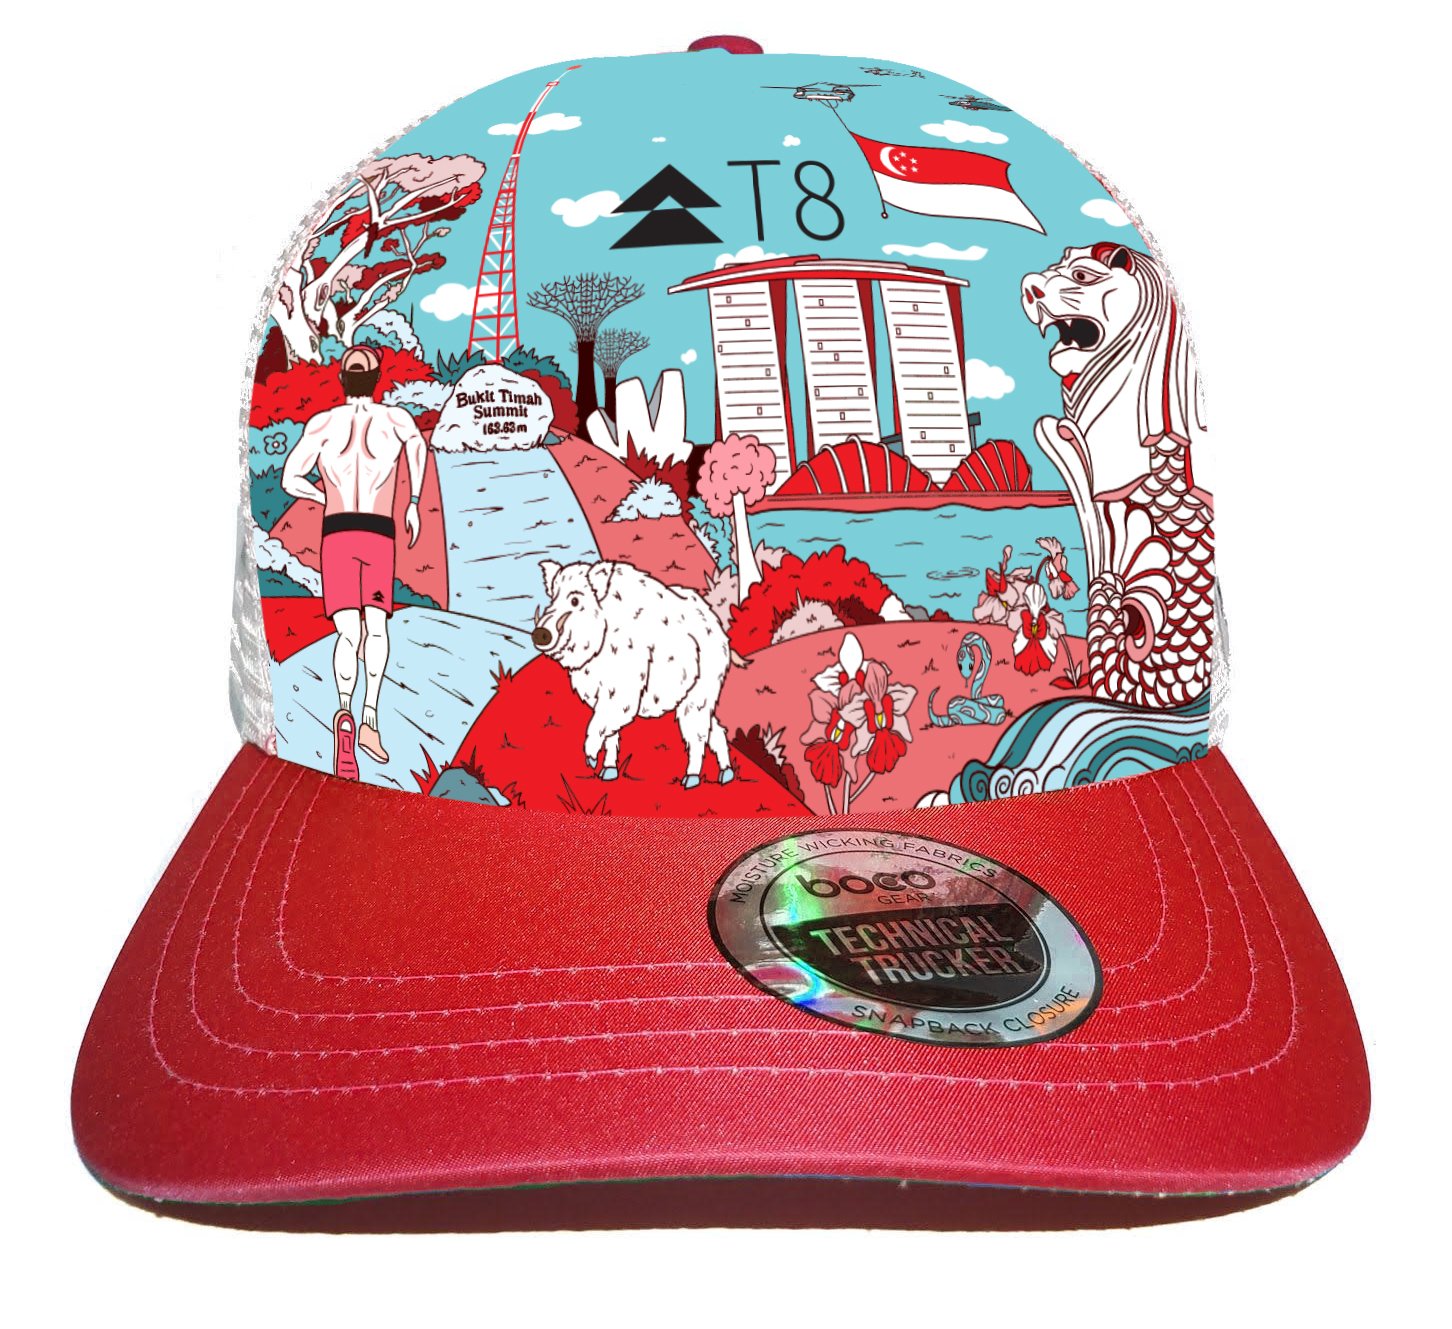 T8 BOCO Technical Trucker Hat - Singapore by Daniel Ng